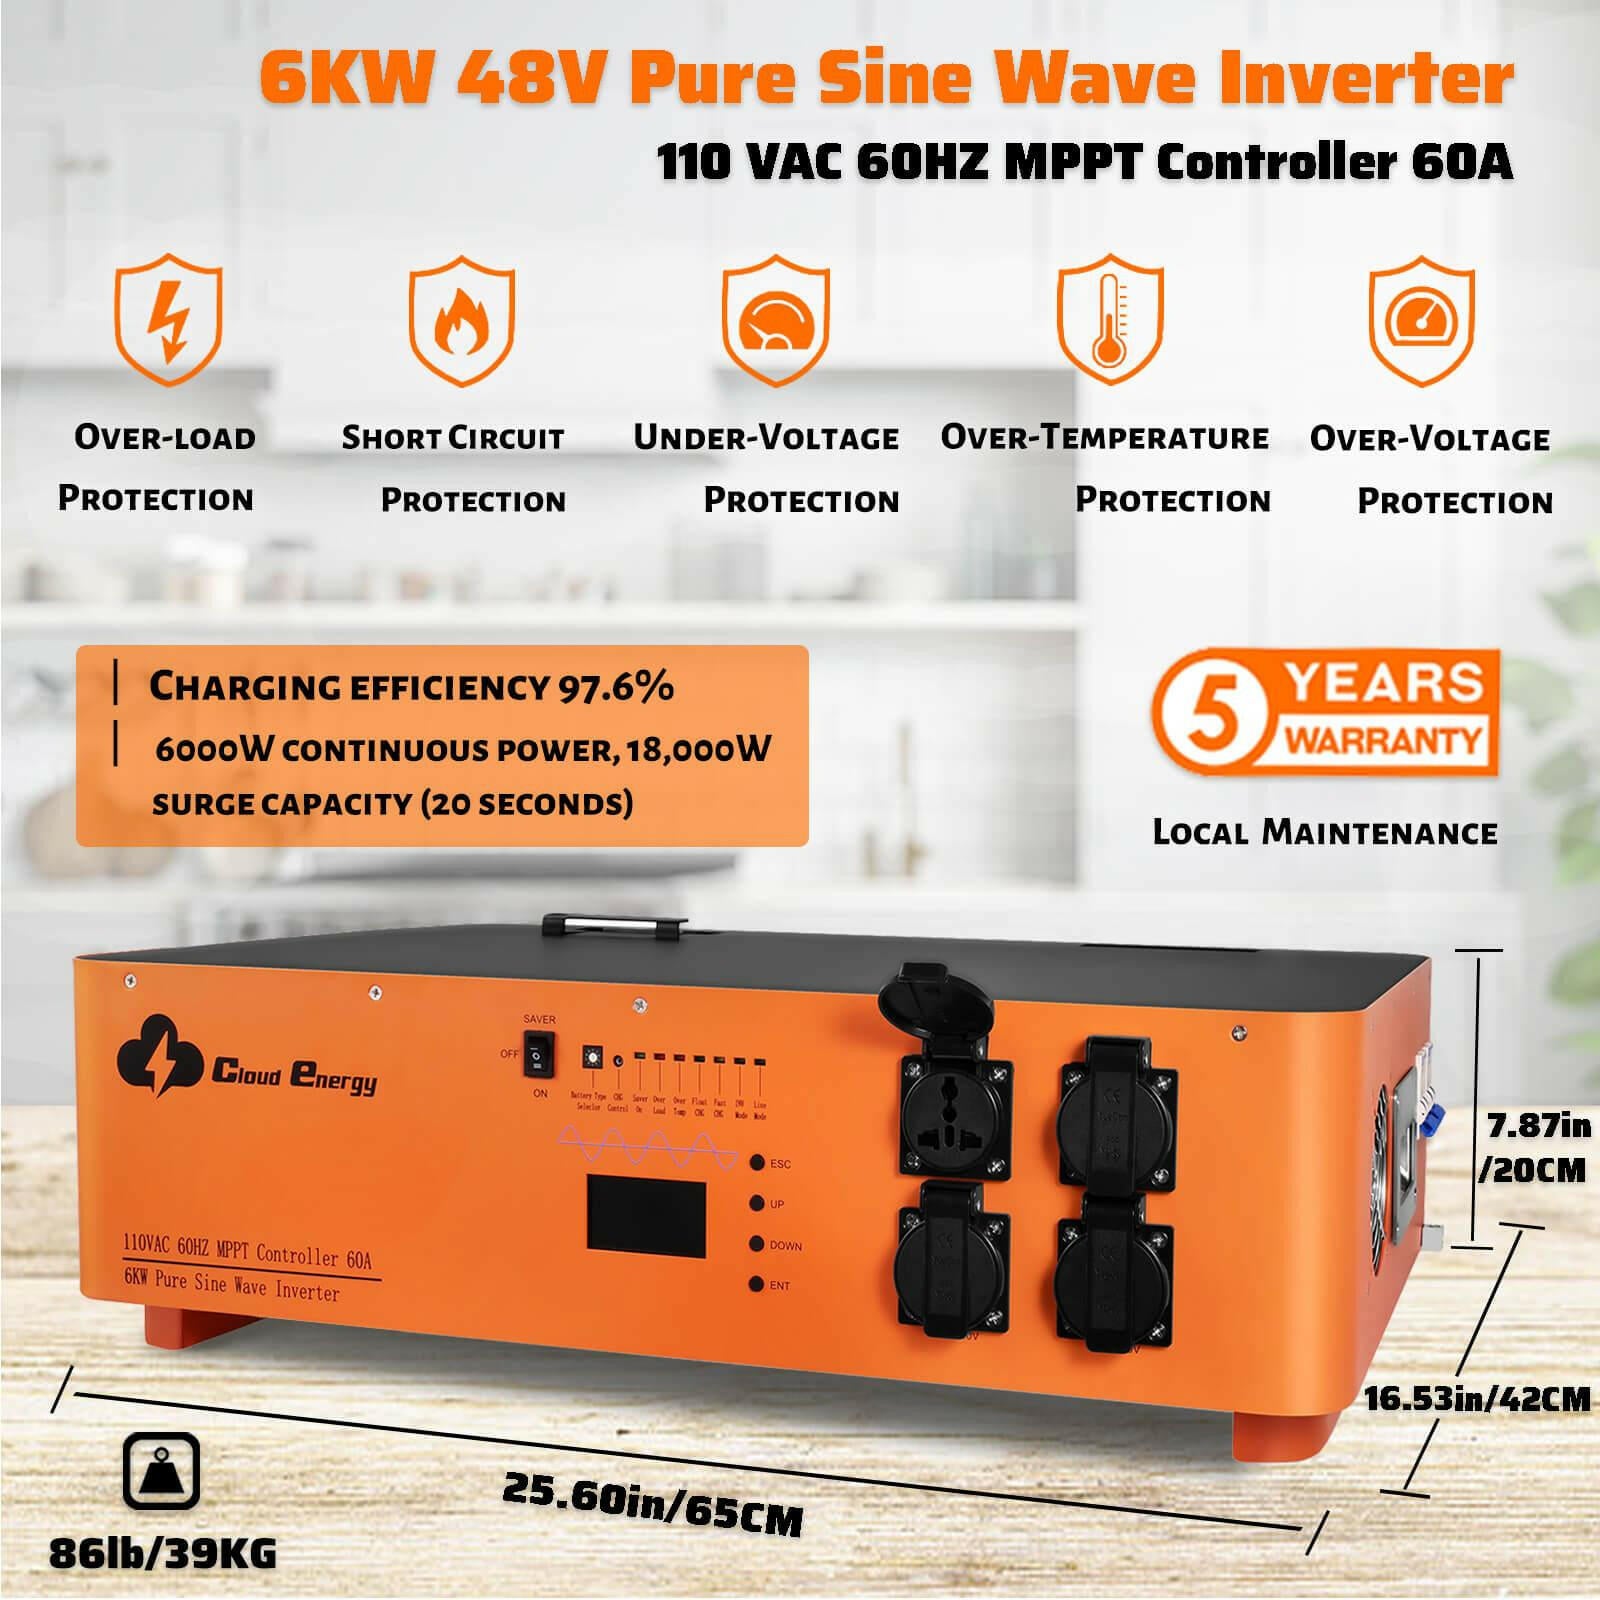 CloudEnergy 48V 150Ah 7.68Kwh Stackable LiFePO4 Battery with 6kw Inverter 60A MTTP(7.68Kwh Battery+Inverter) - CloudEnergy